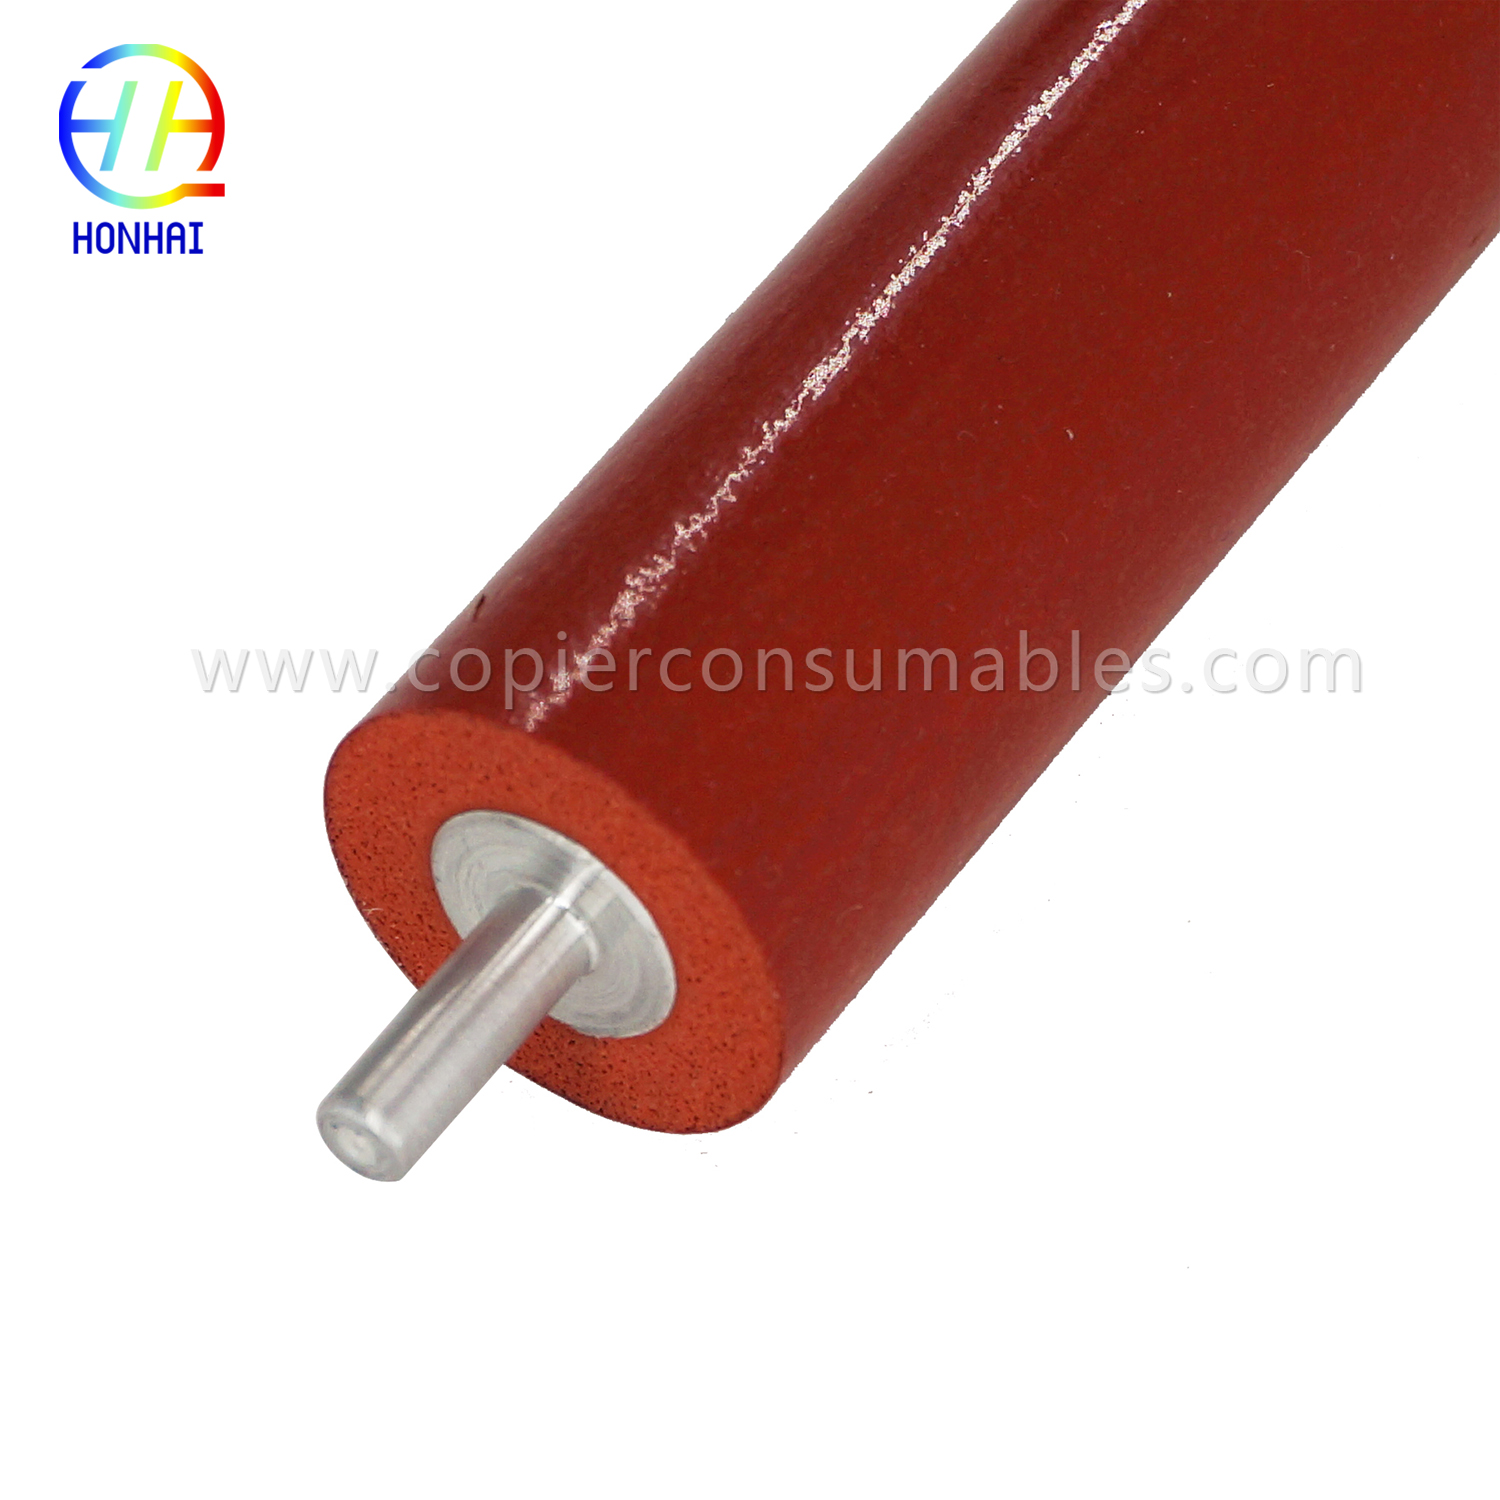 Lower Pressure Roller Brother HL 3140 3150 3170 MFC 9120 9130 9133 9140 9330 9340 DCP 9020 (TN251 TN255) (9) 拷贝